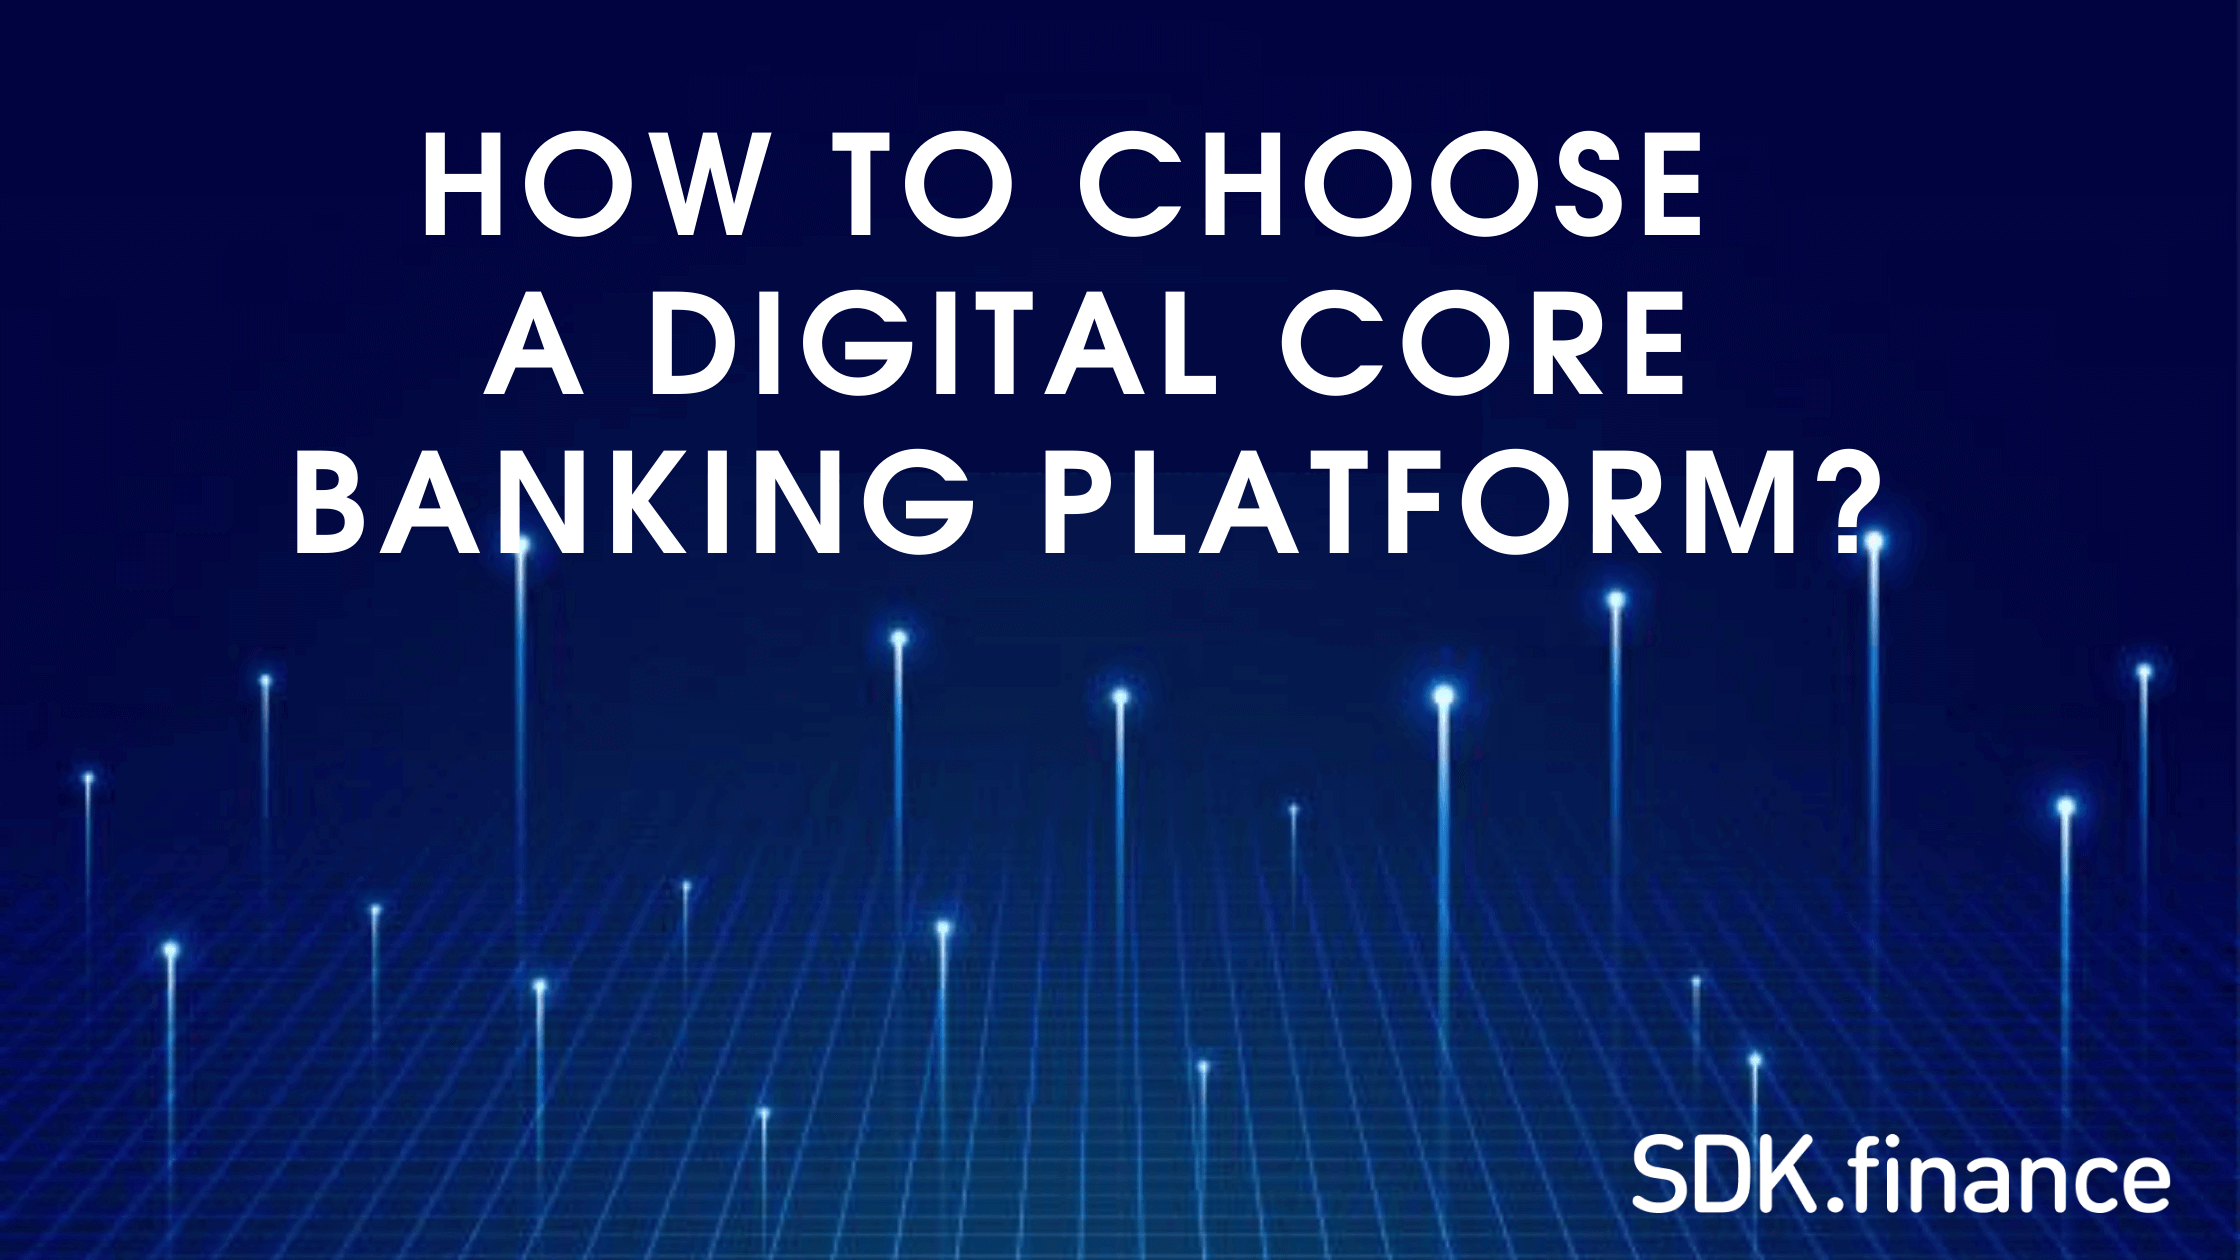 How to Choose a Digital Core Banking Platform?